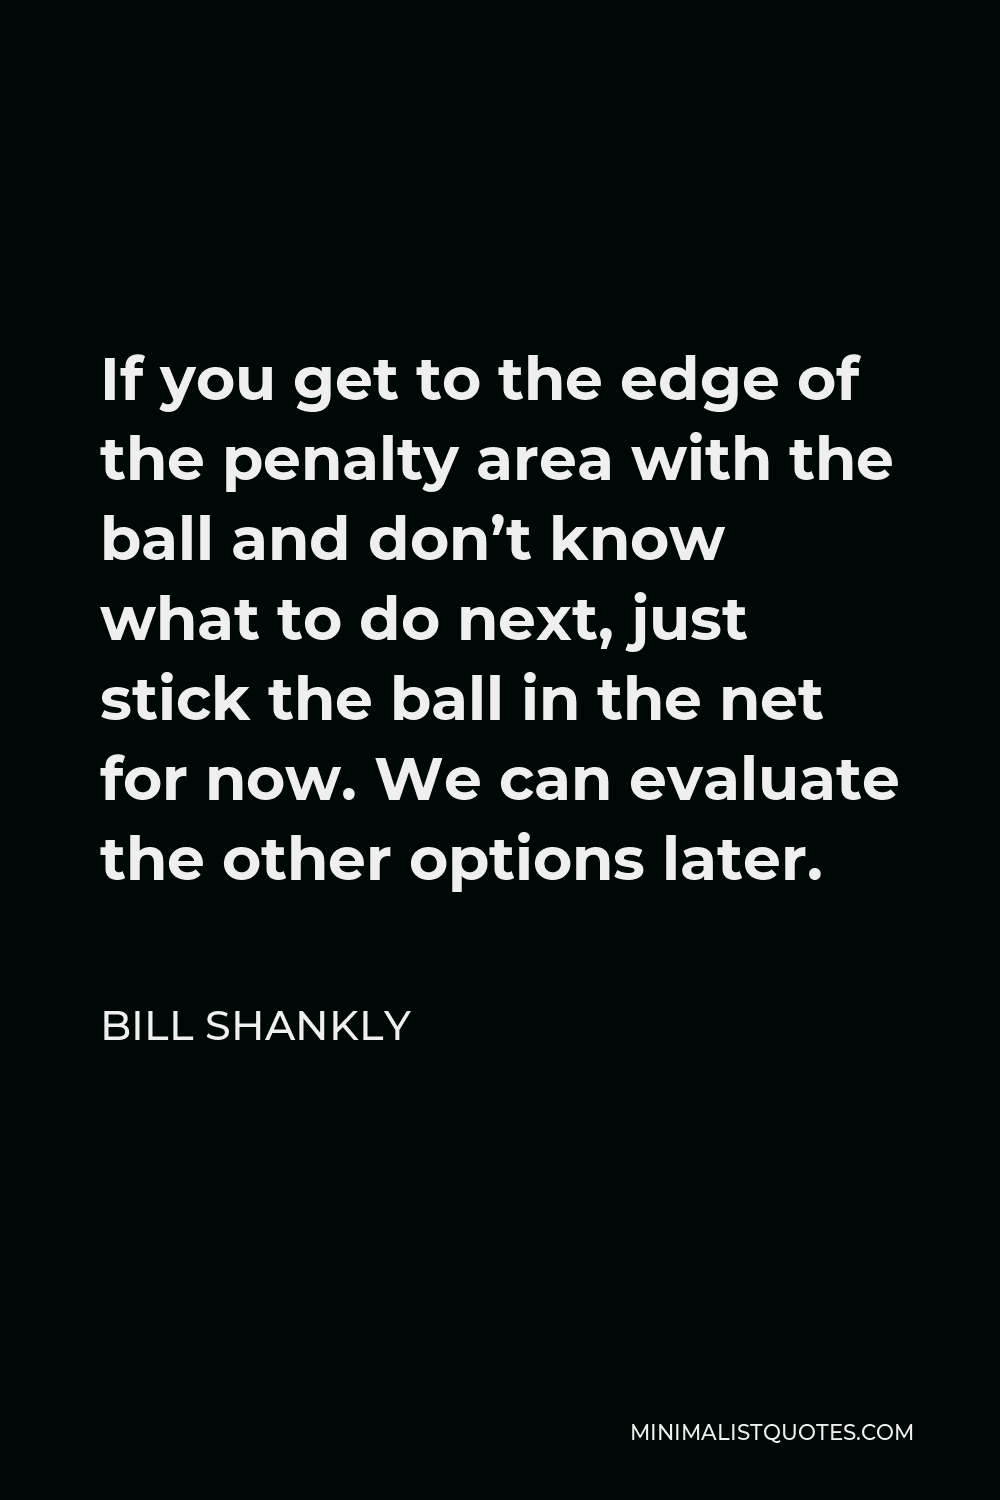 Bill Shankly Quote - If you get to the edge of the penalty area with the ball and don’t know what to do next, just stick the ball in the net for now. We can evaluate the other options later.